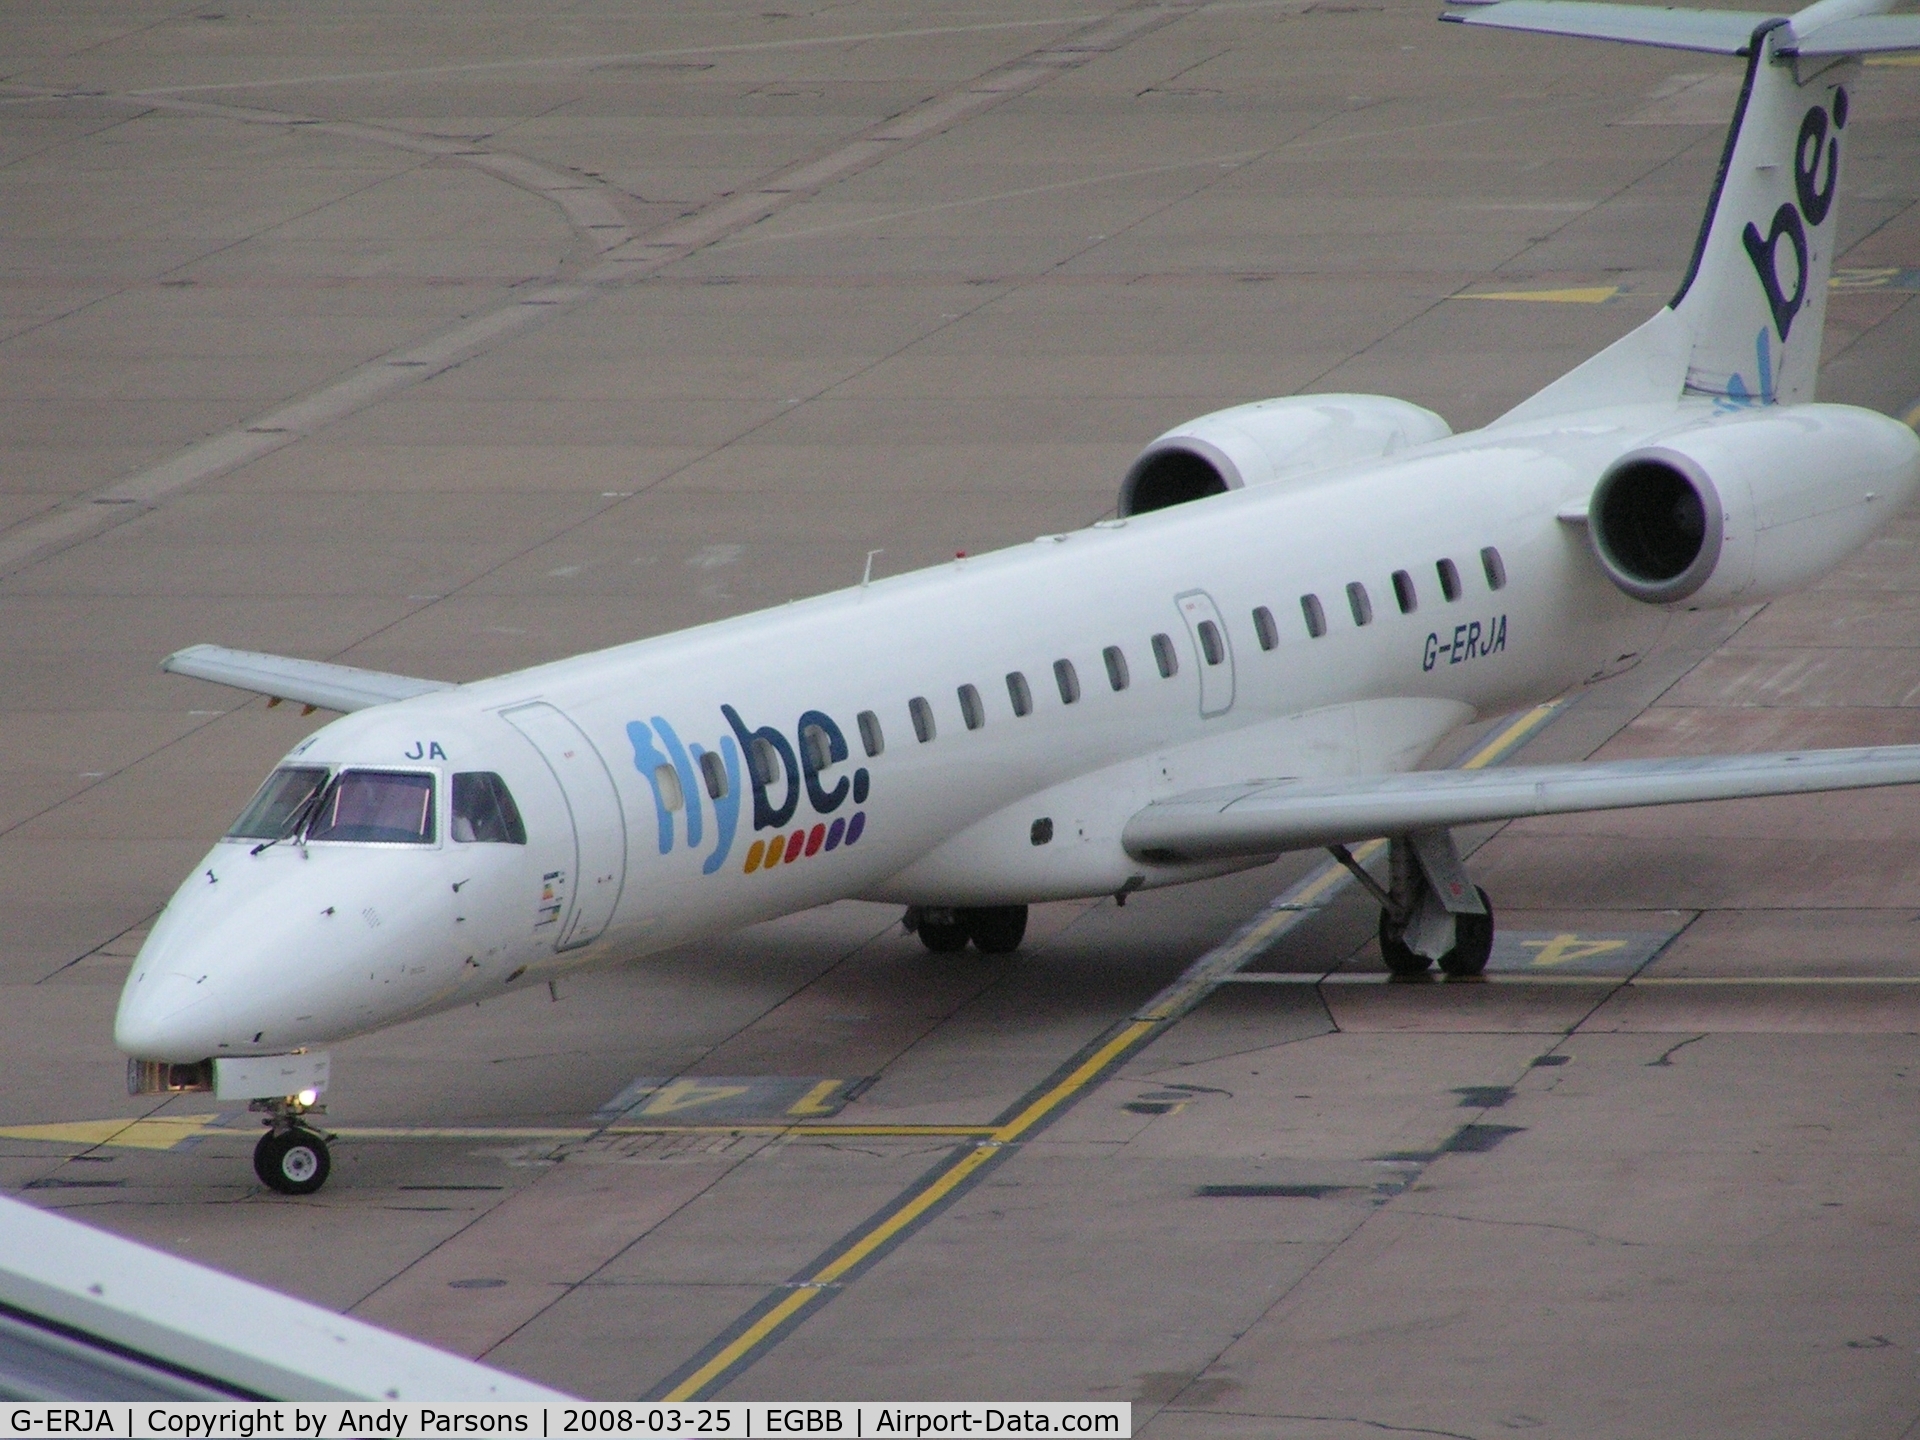 G-ERJA, 2000 Embraer EMB-145EP (ERJ-145EP) C/N 145229, Slightly different view of an Embrear